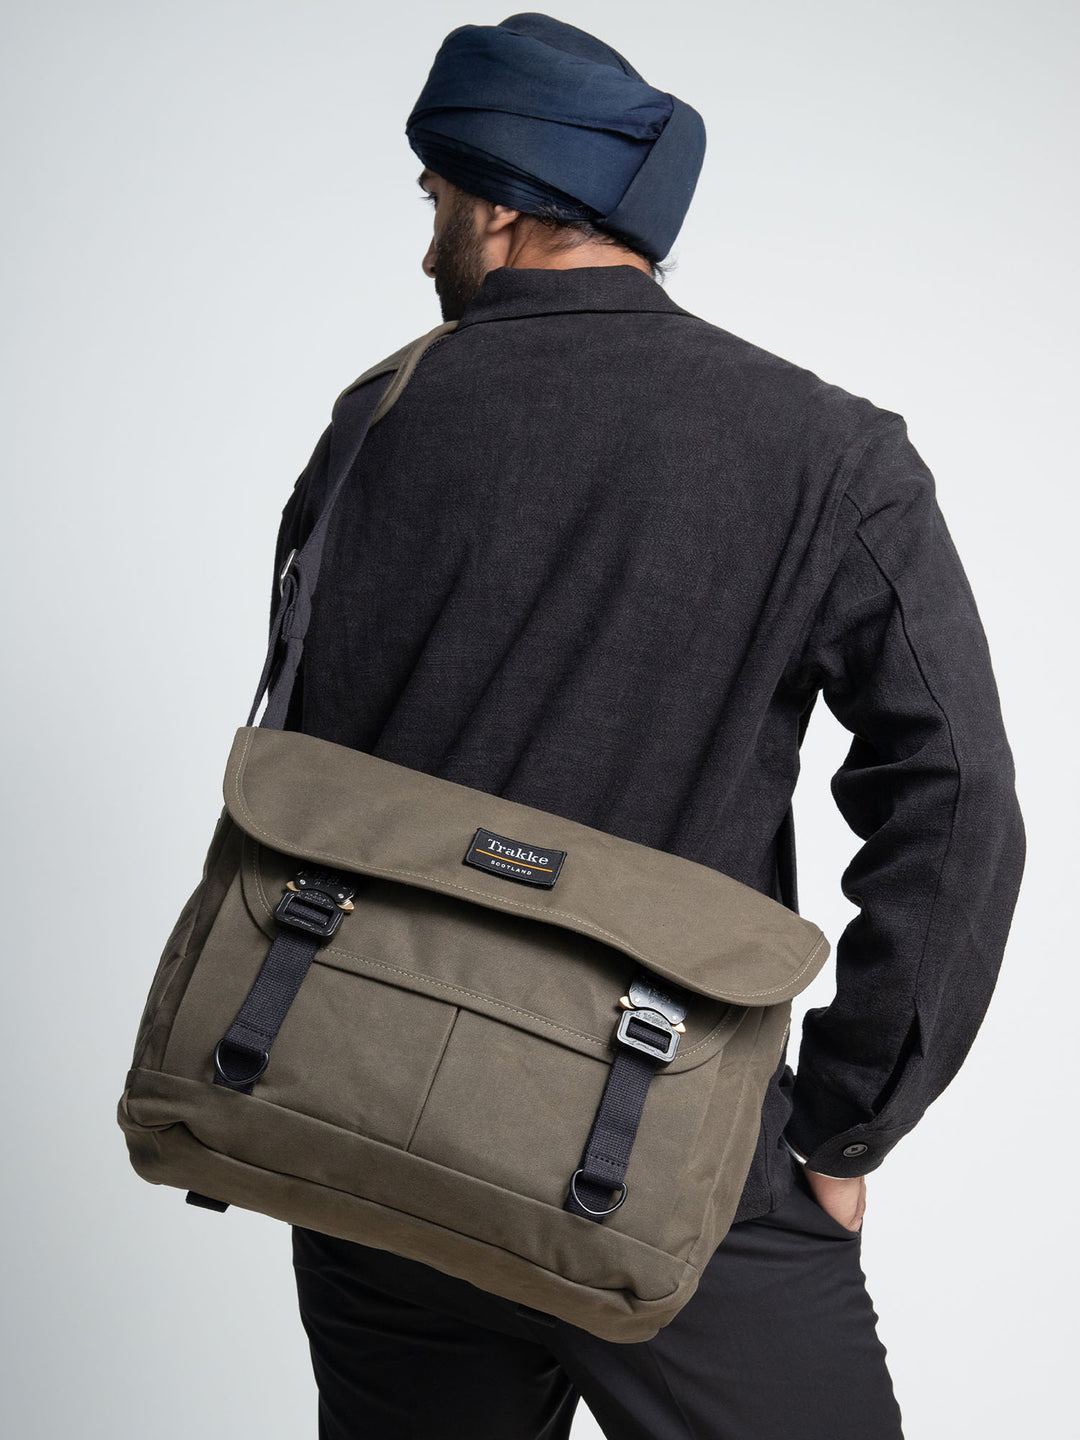 a person with an olive coloured Bairn Pro Messenger on their back